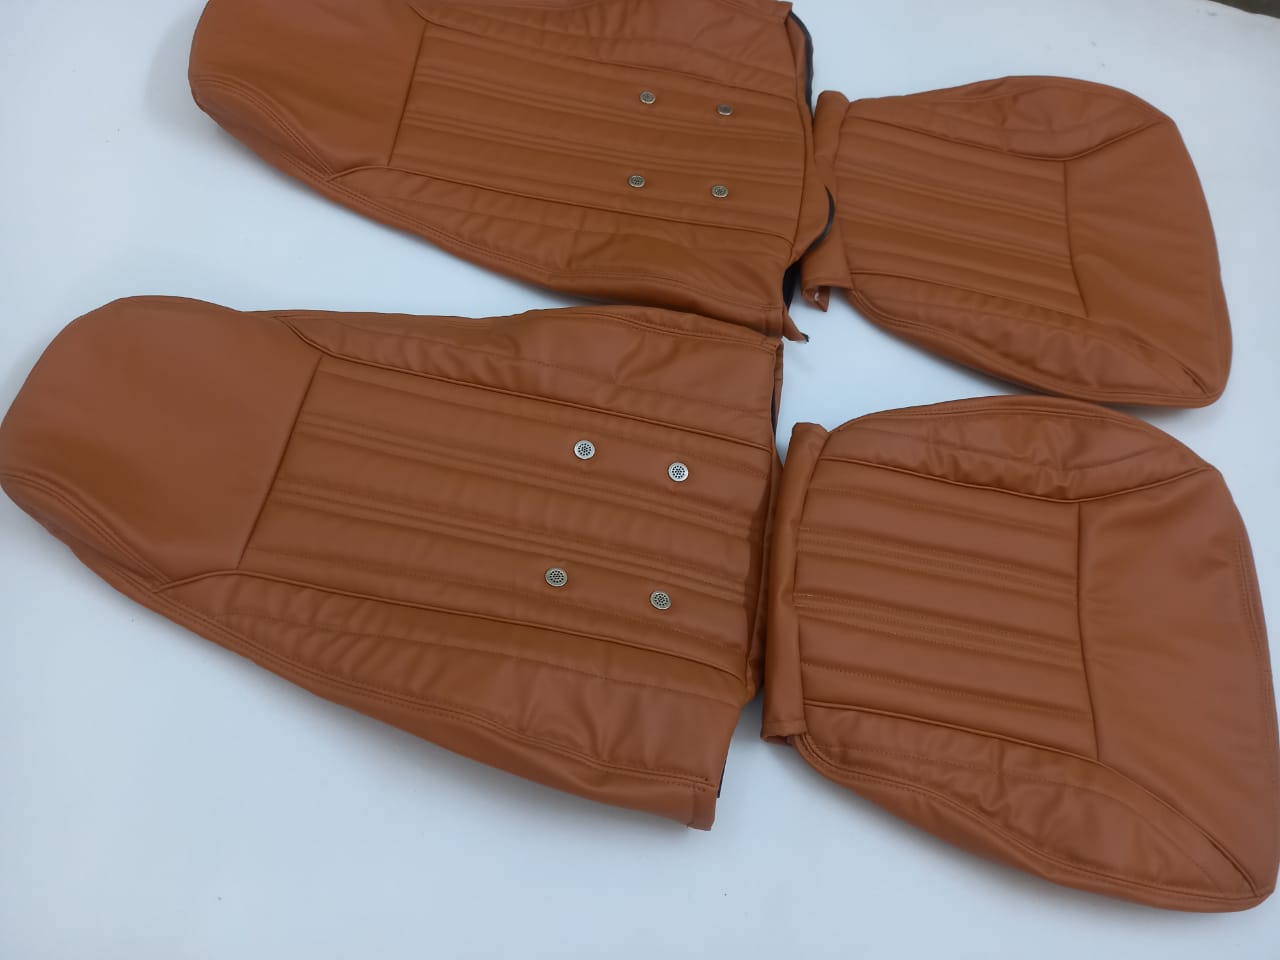 Datsun 240Z or 260Z or 280Z - (Year 1970 to 1978)  - Synthetic Leather - Seat Covers Orange